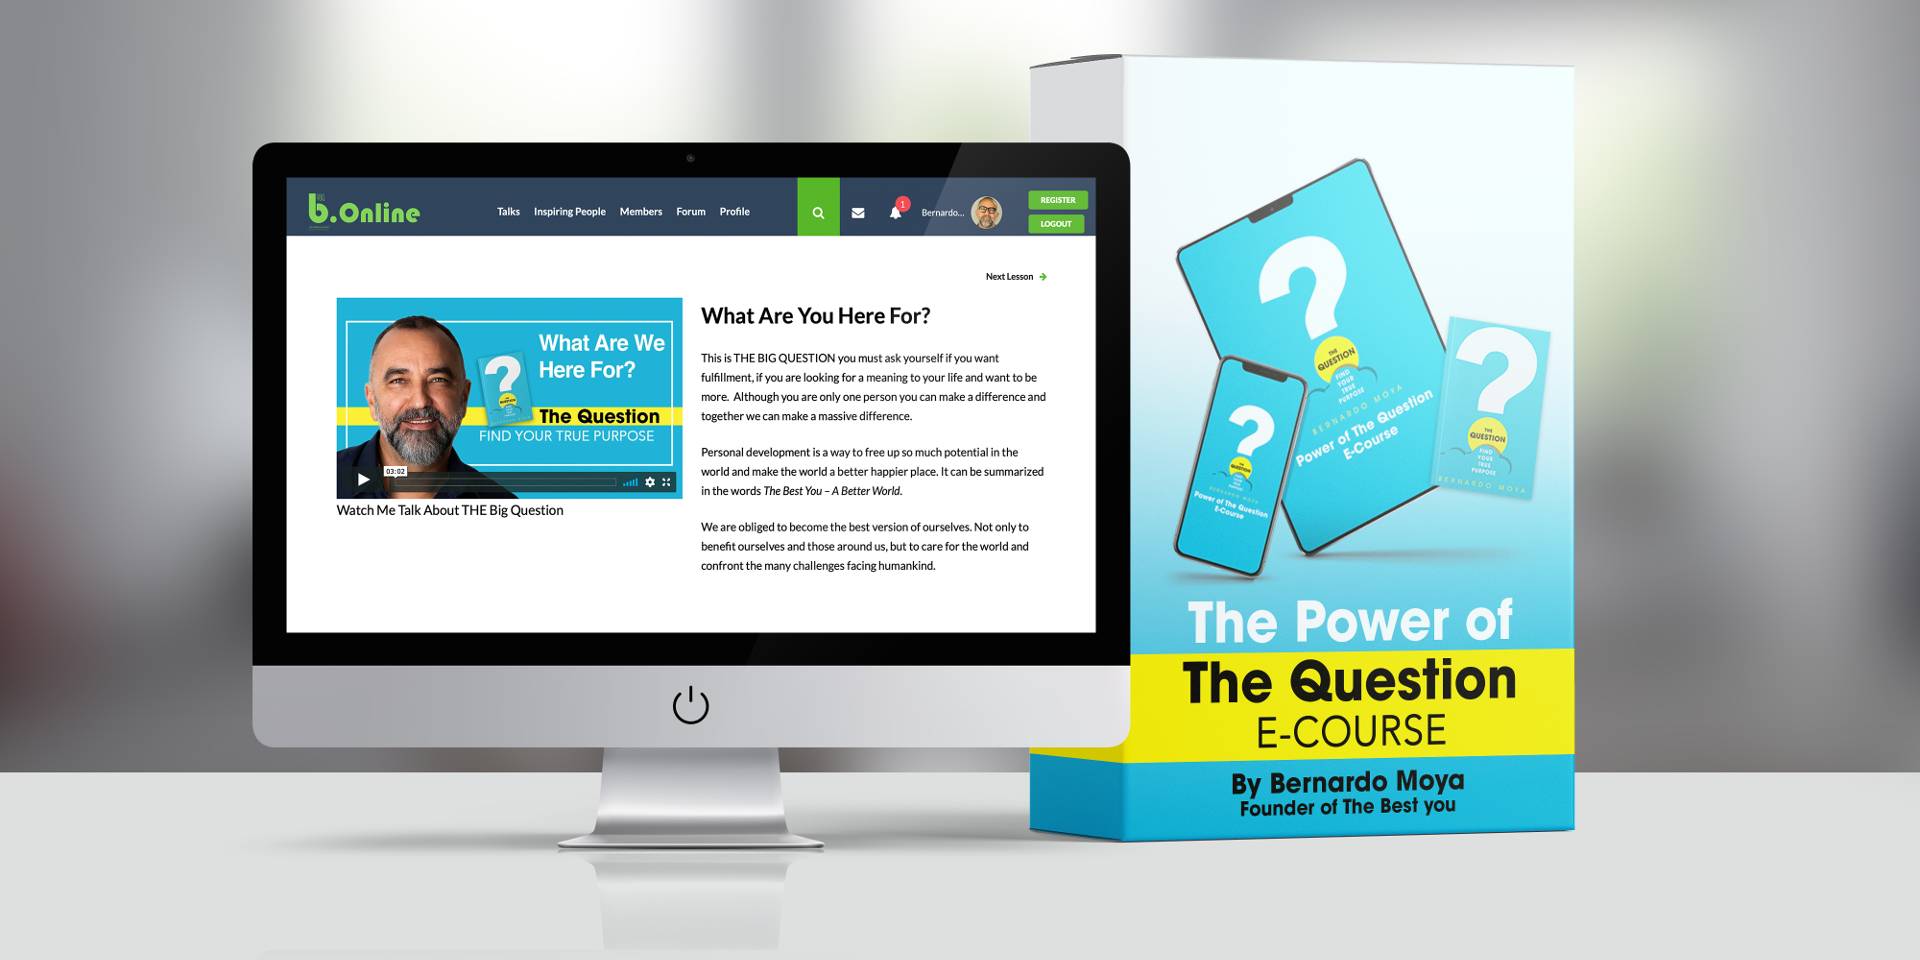 The Power of the Question E-course